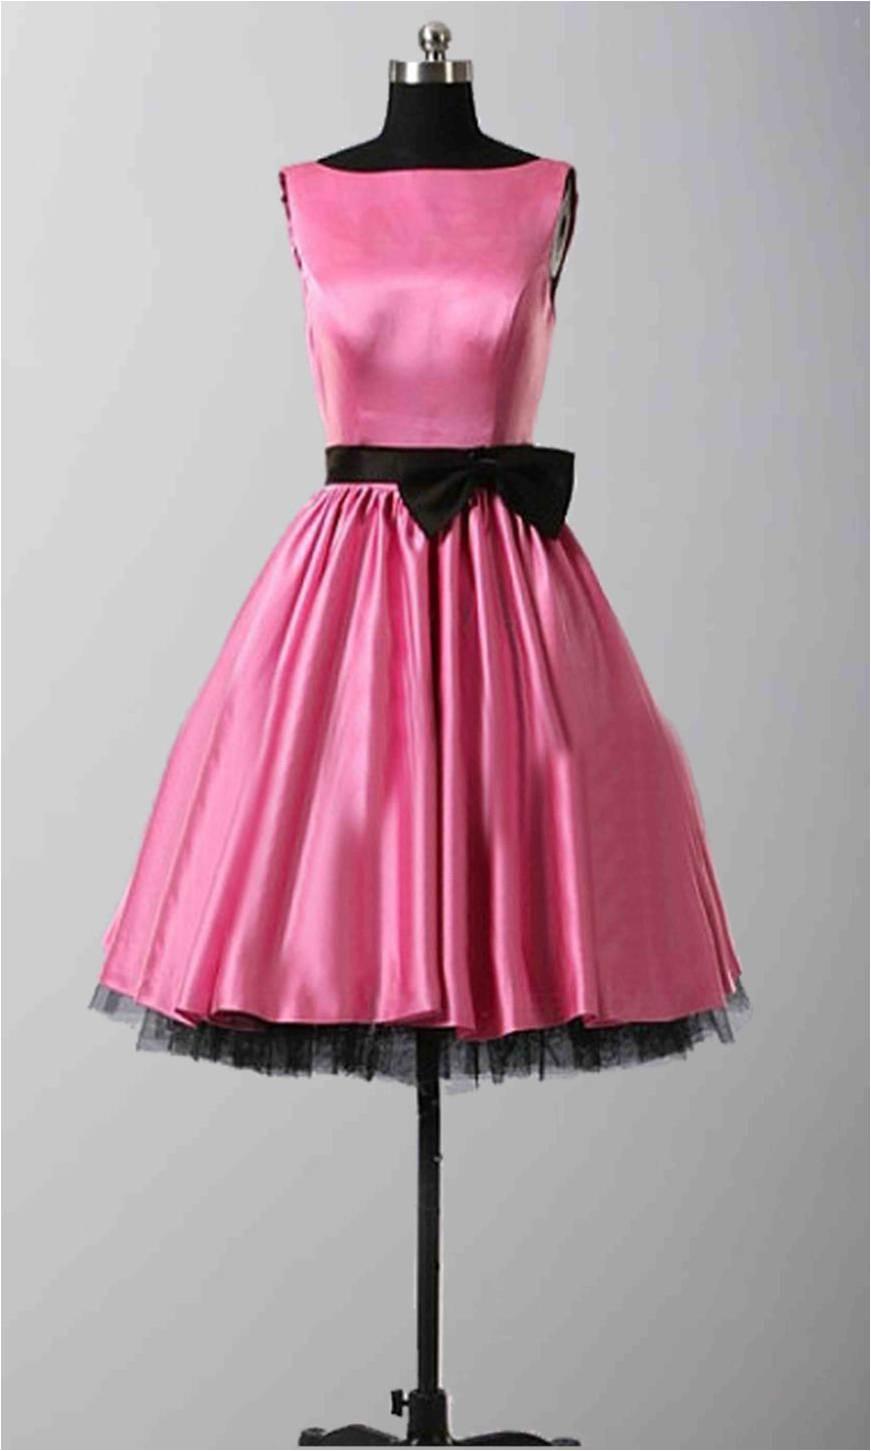 Wedding - Bateau Pink Short Satin BowKnot Retro Bridesmaid Gowns KSP278 [KSP278] - £85.00 : Cheap Prom Dresses Uk, Bridesmaid Dresses, 2014 Prom & Evening Dresses, Look for cheap elegant prom dresses 2014, cocktail gowns, or dresses for special occasions? kissprom.